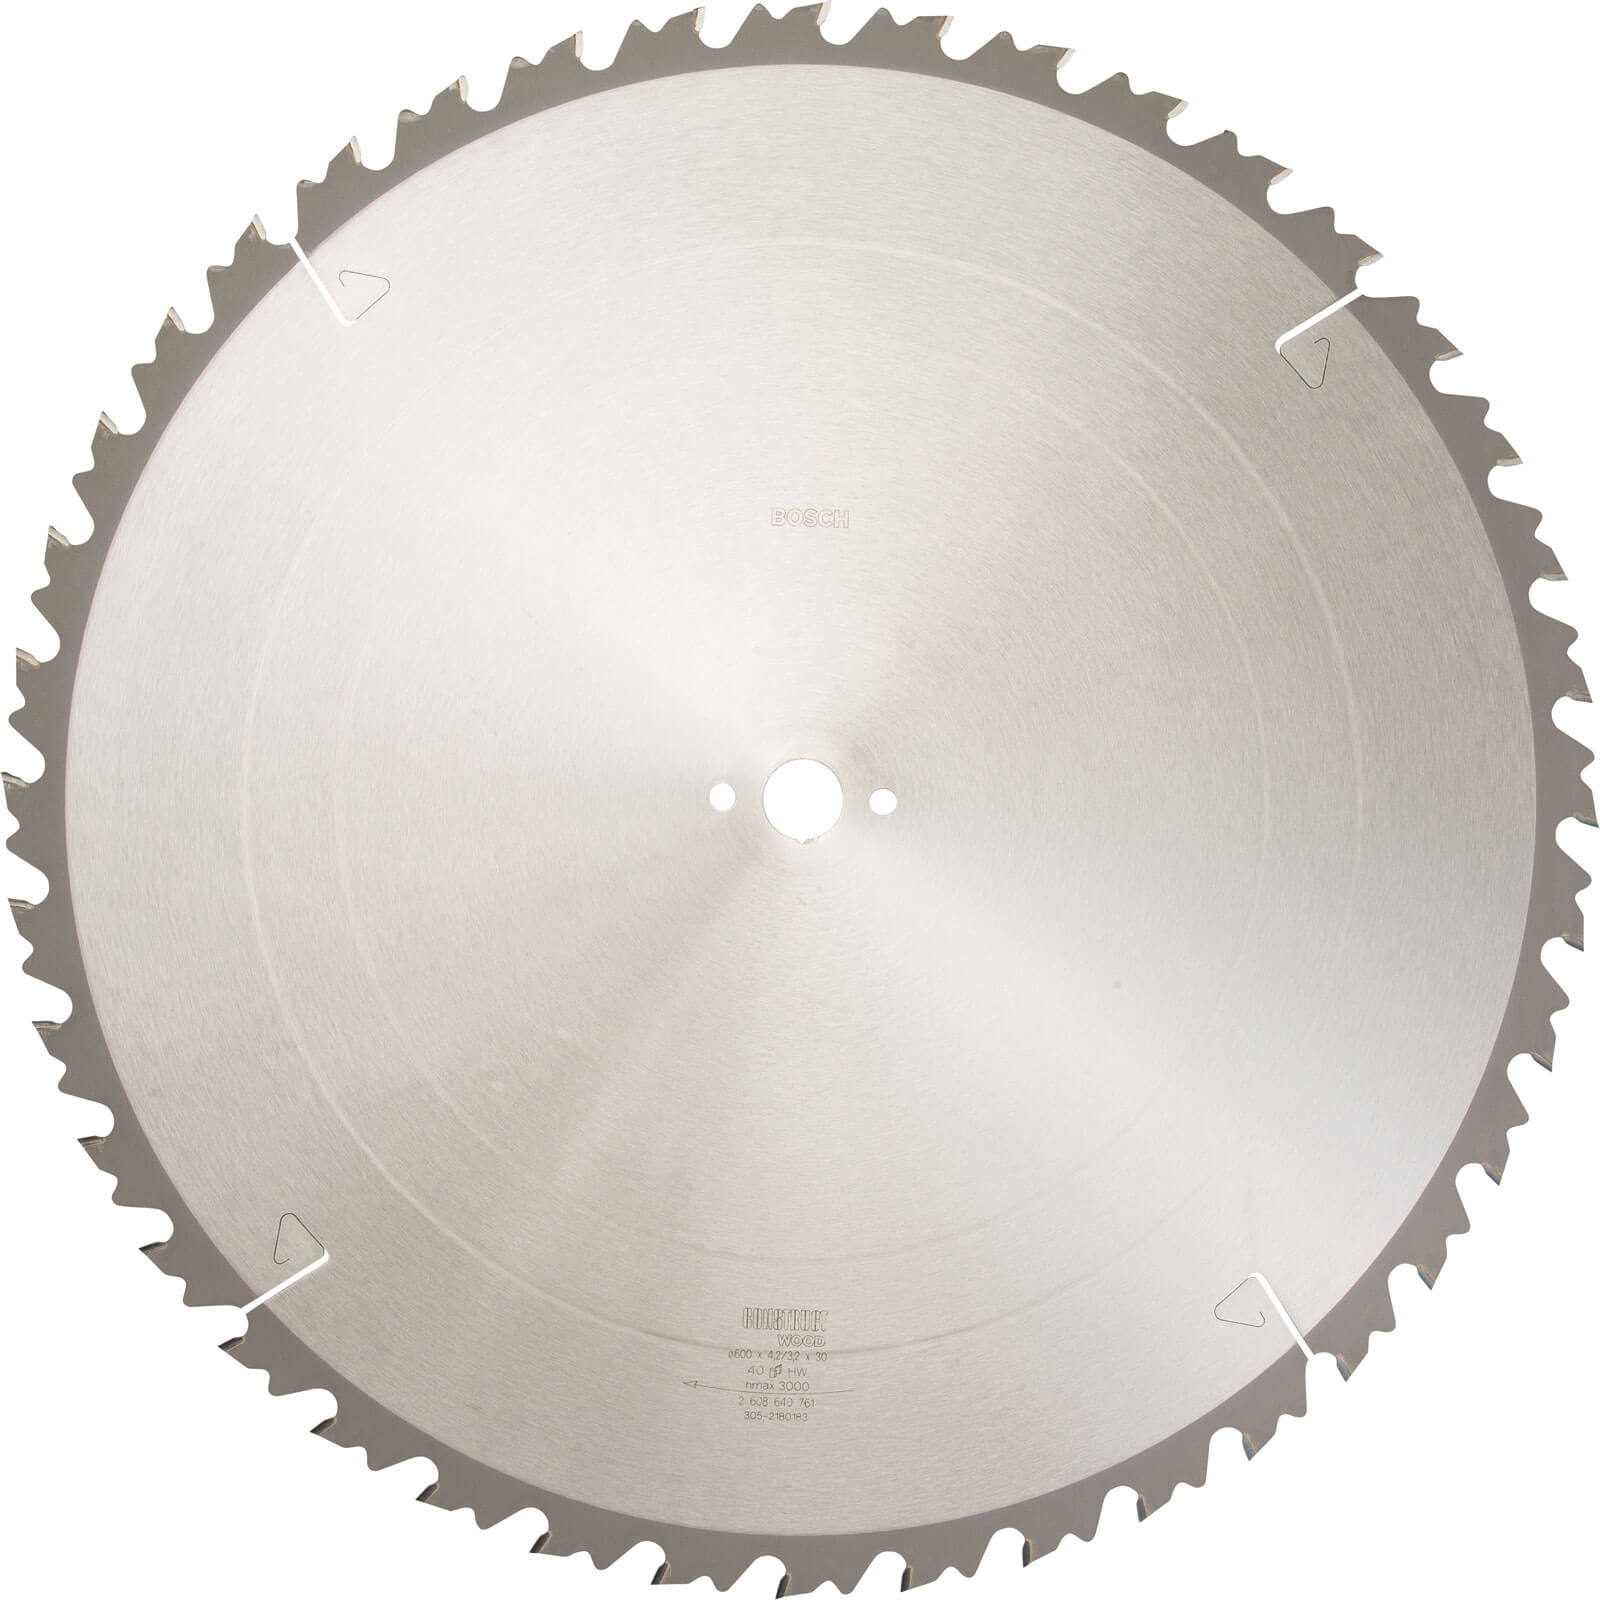 Bosch Construct Wood Cutting Table Saw Blade 600mm 40T 30mm